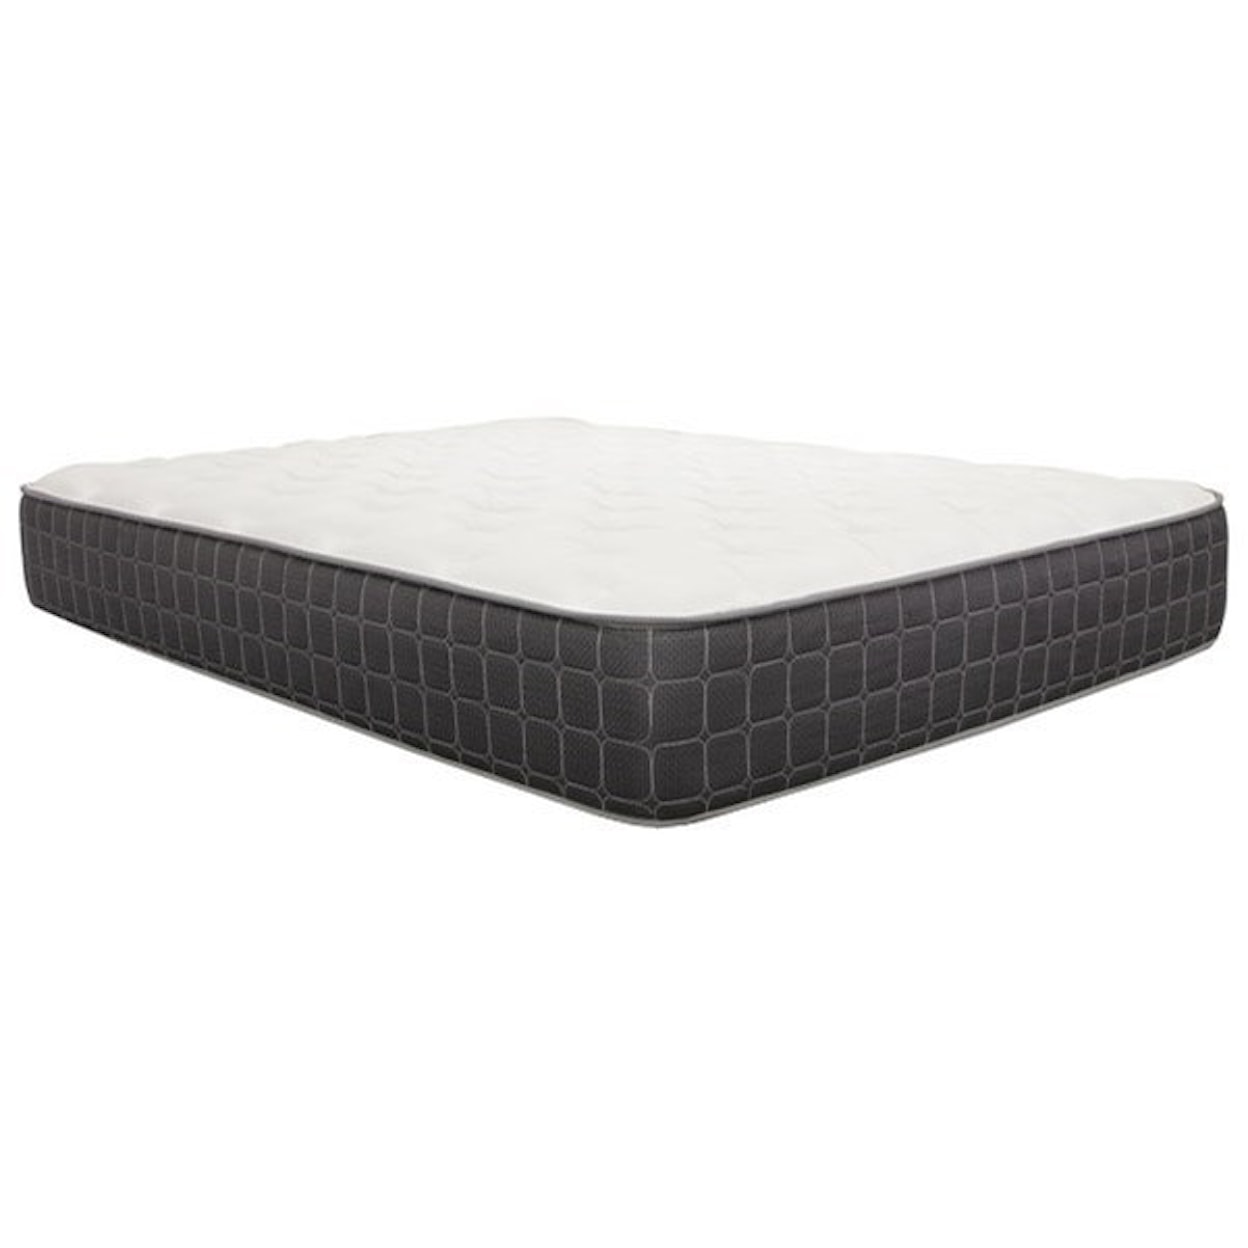 Corsicana Dilly Plush Full Plush Pocketed Coil Mattress